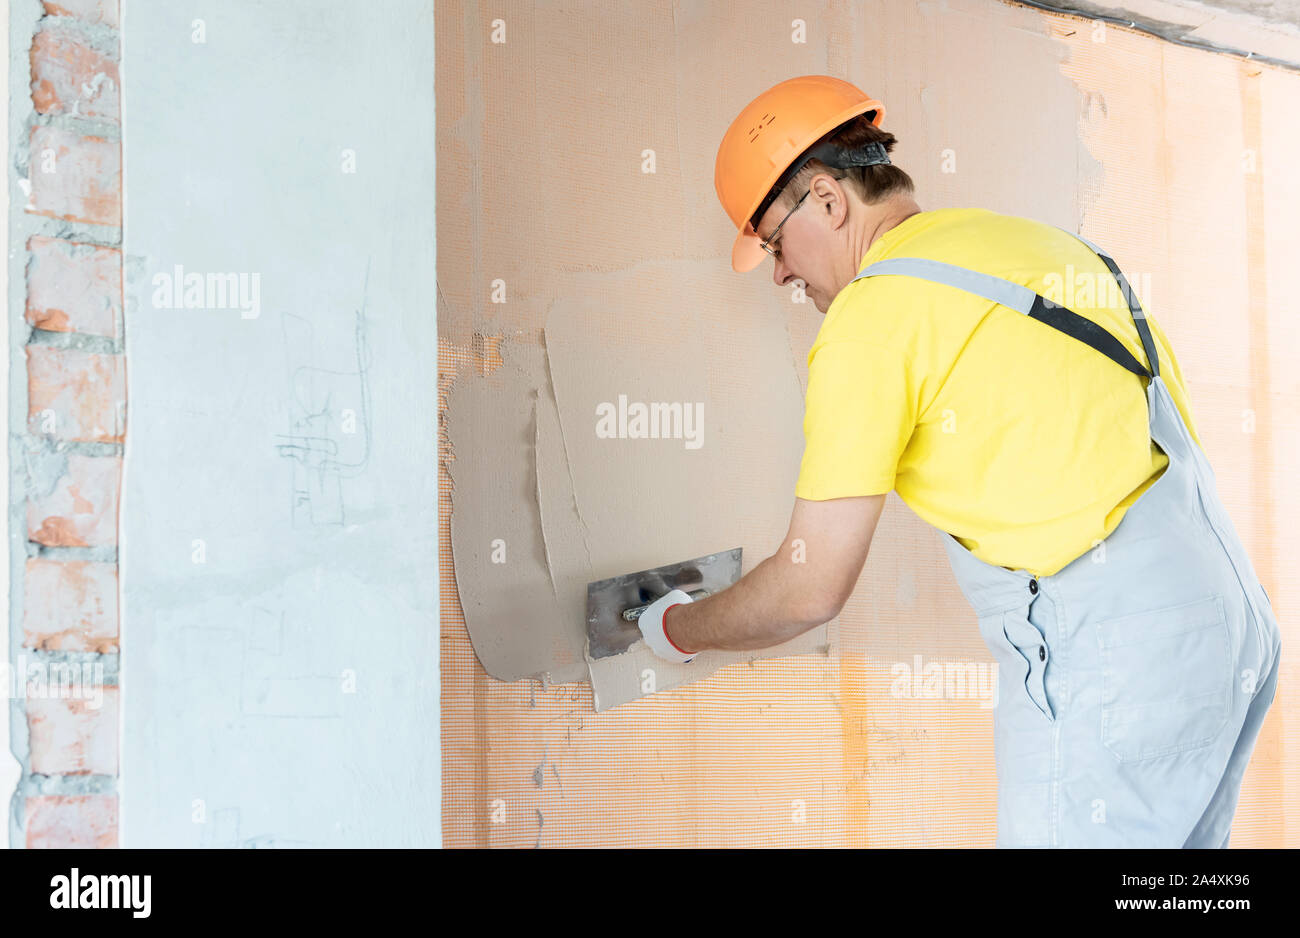 The worker is applying putty on a fiberglass mesh on the wall. He is using a trowel. Stock Photo